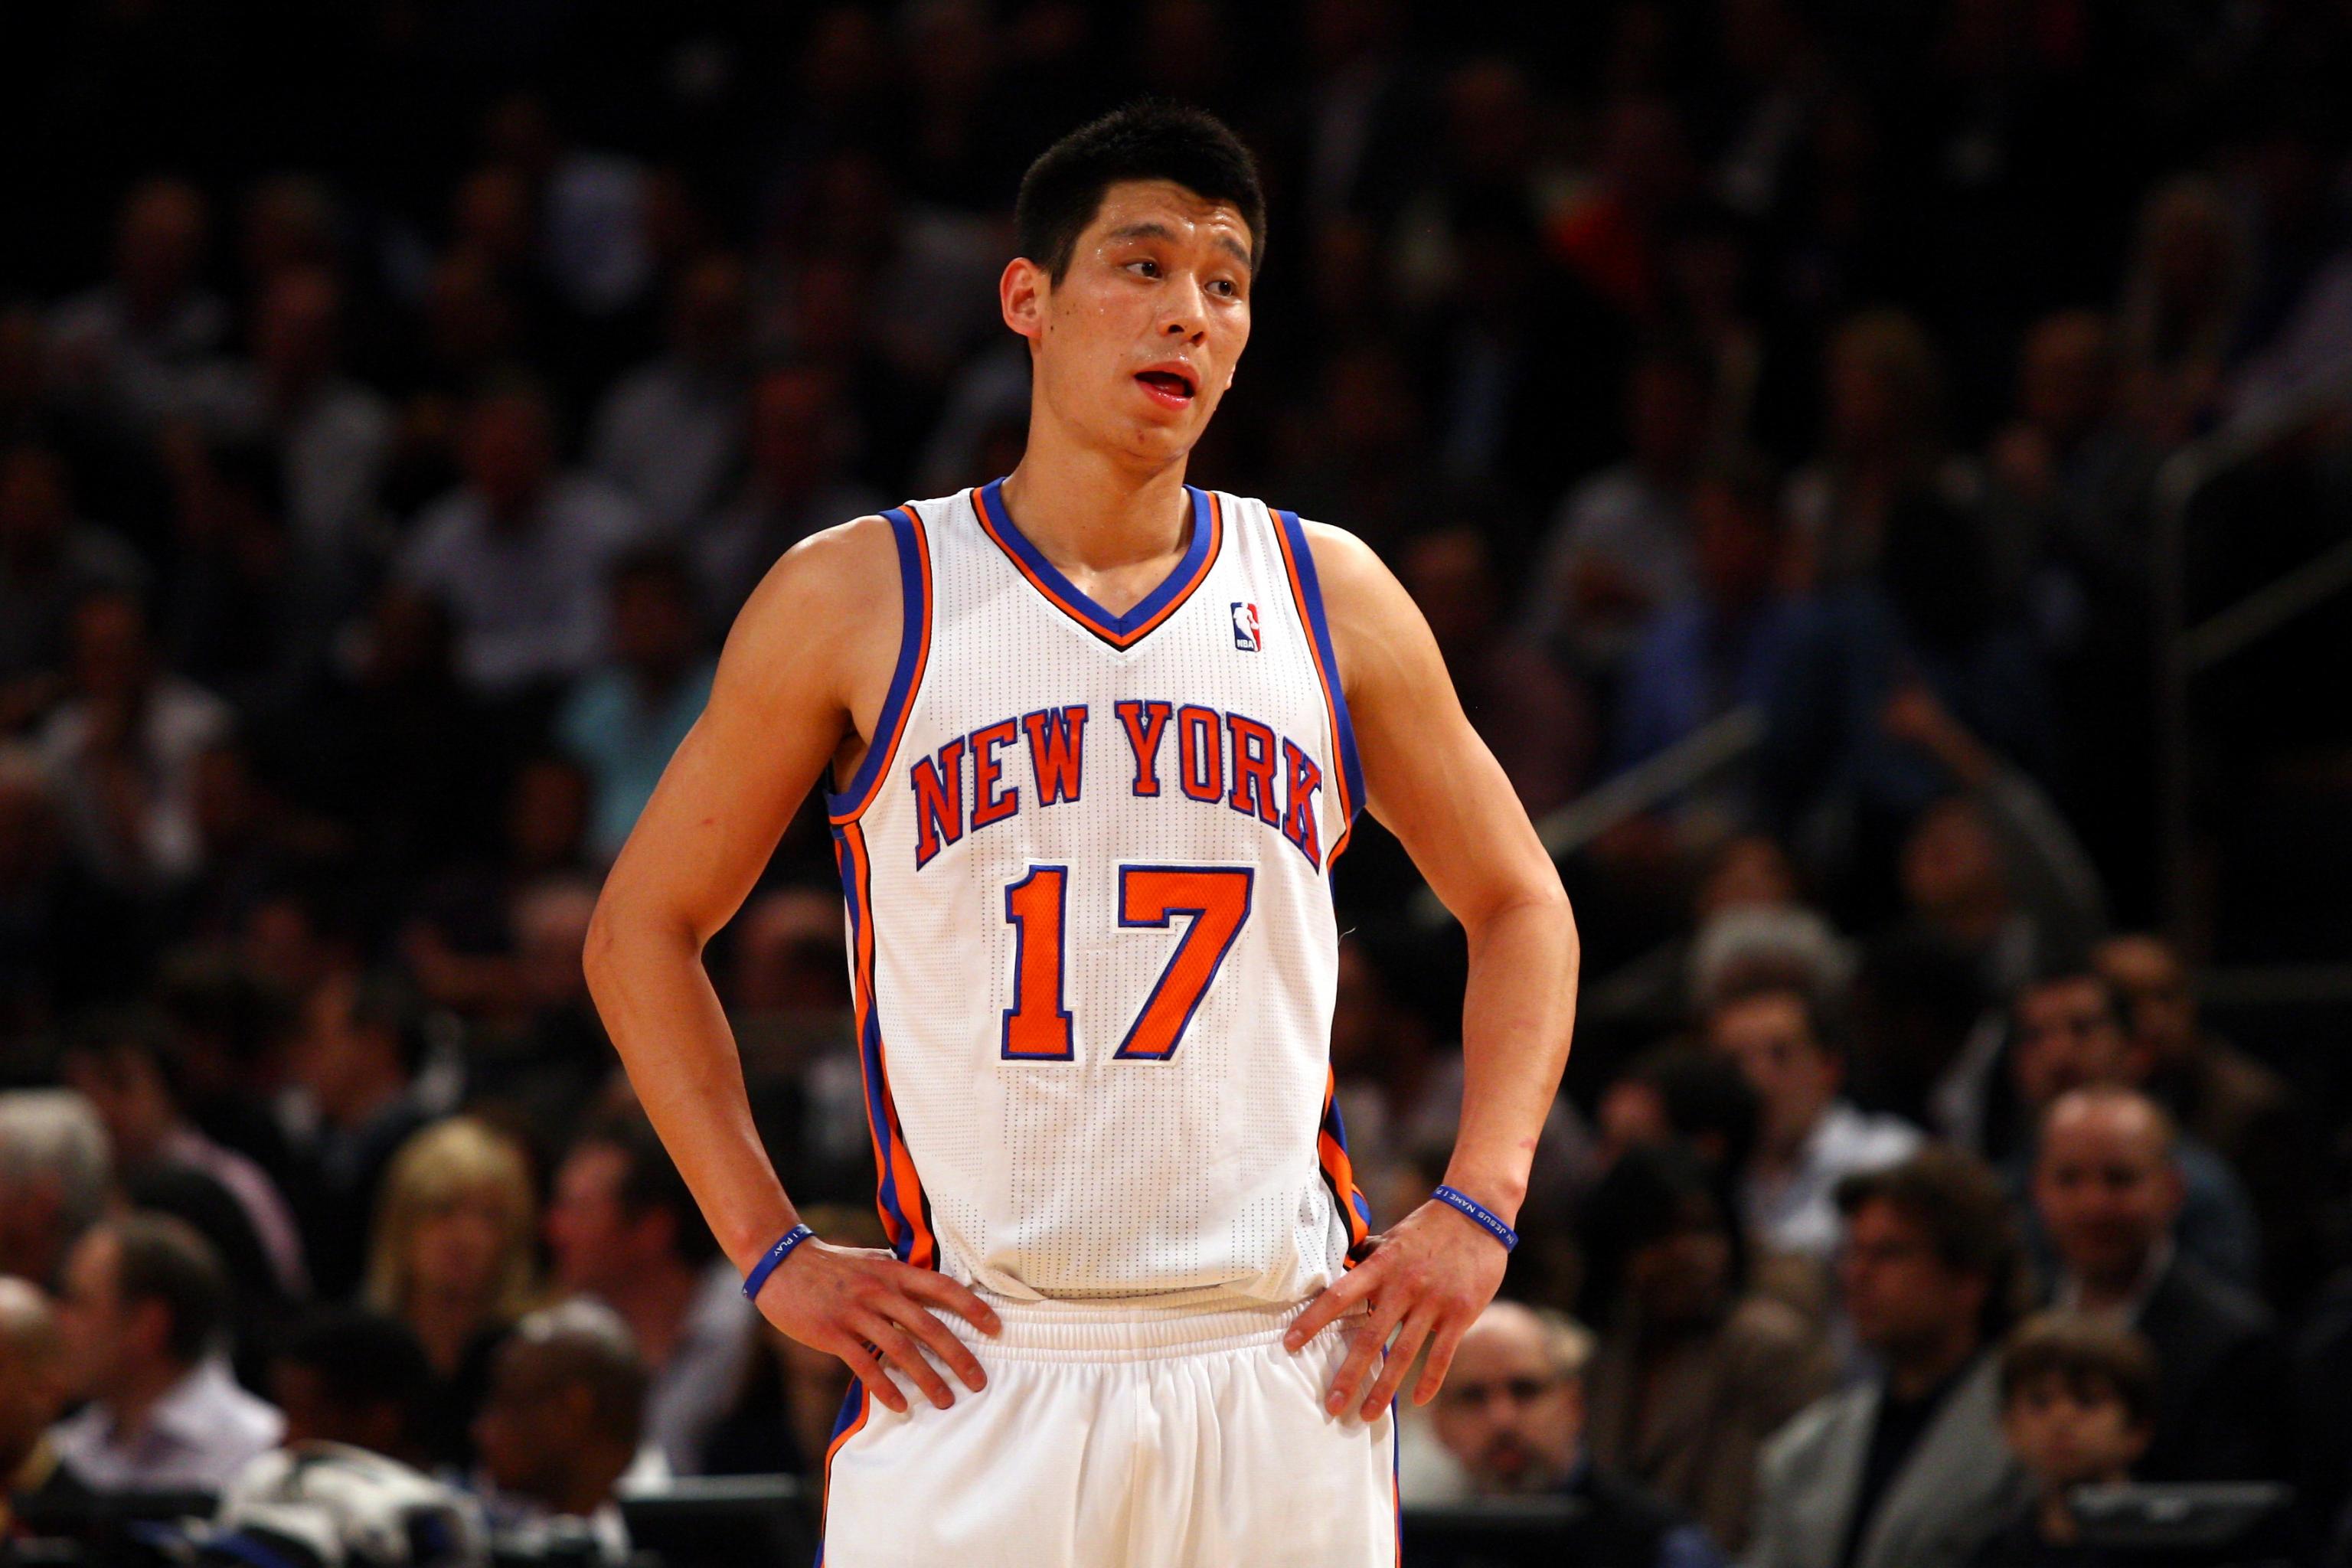 Jeremy Lin has NBA's top-selling jersey for 2011-2012 regular